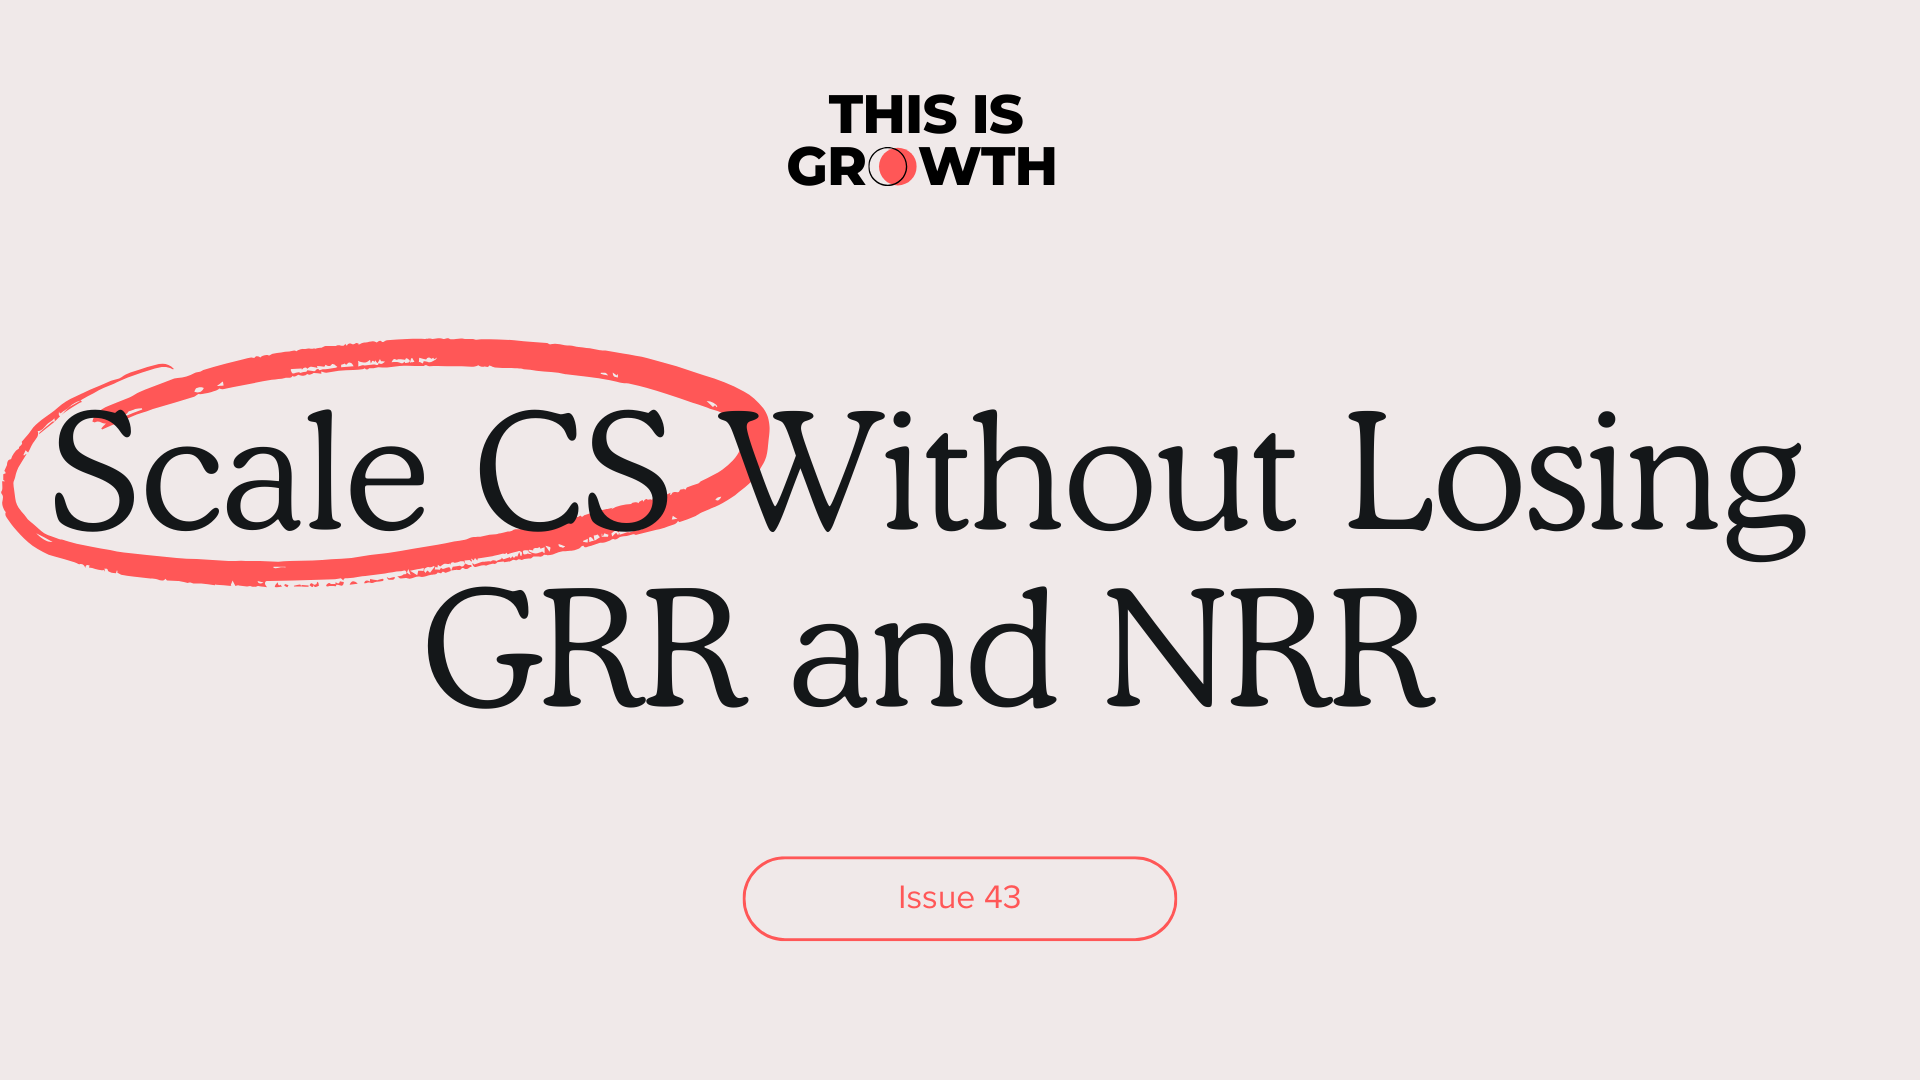 Scale CS Without Losing GRR and NRR